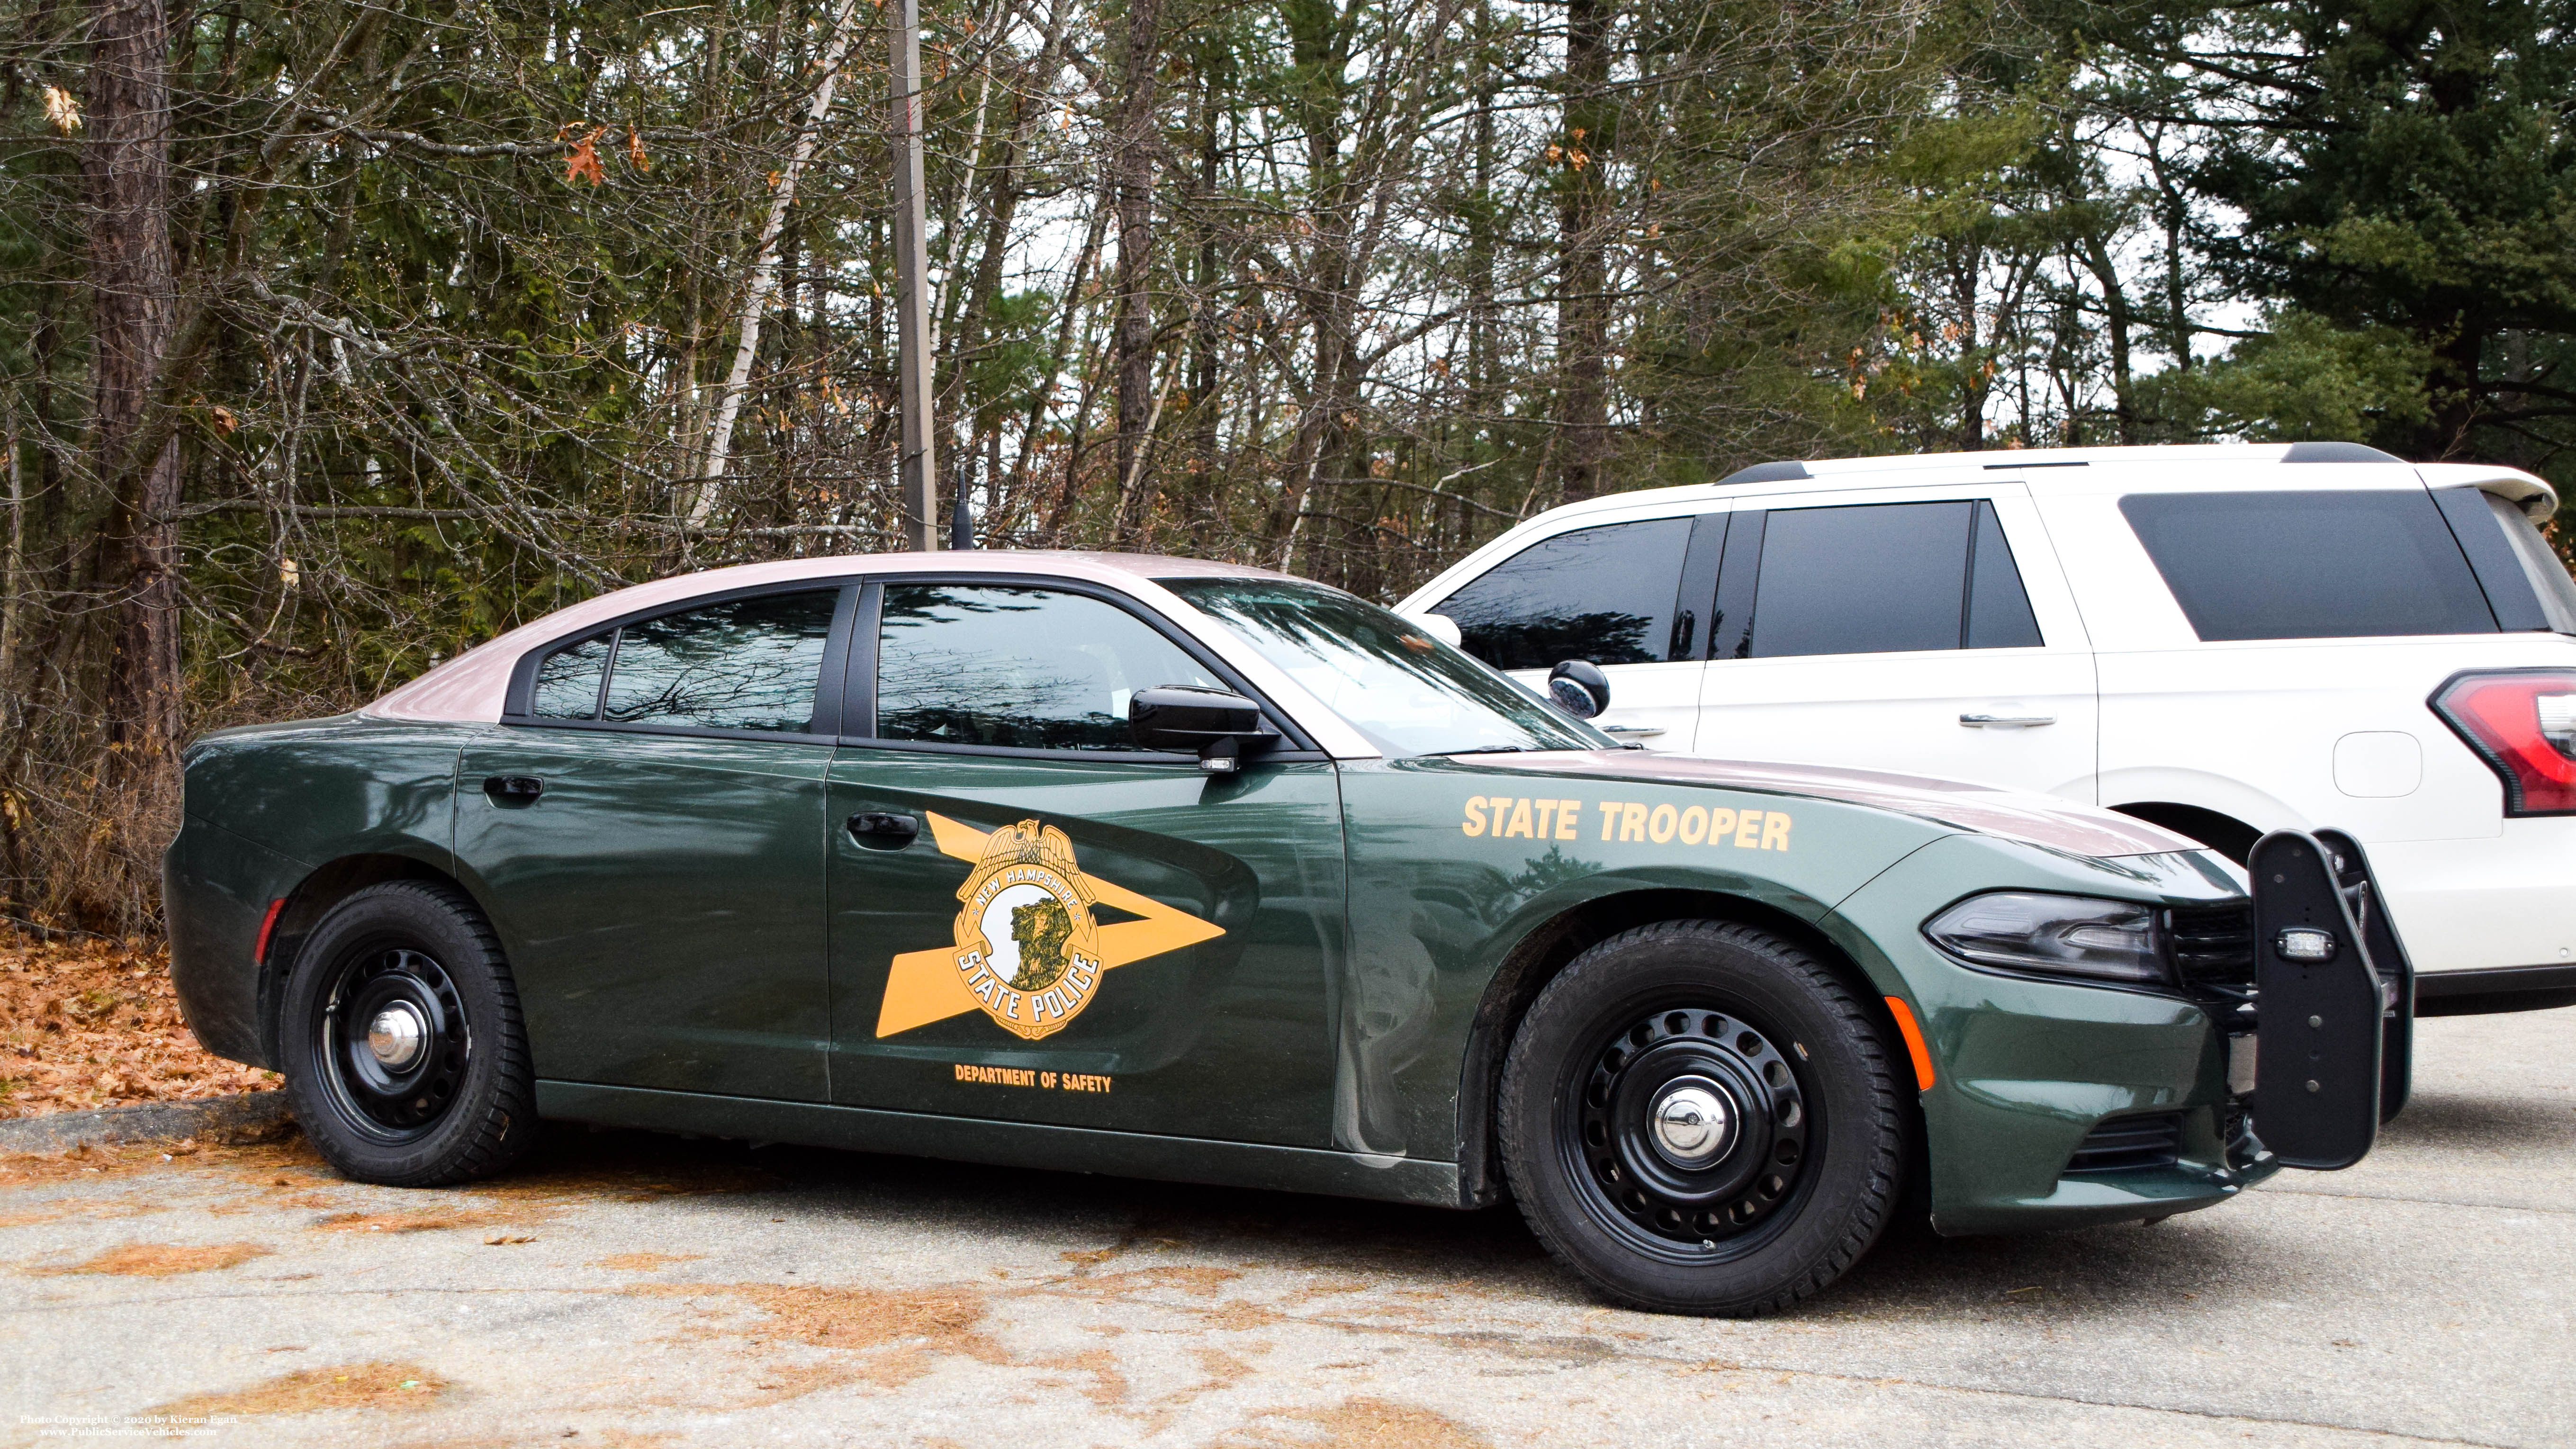 A photo  of New Hampshire State Police
            Cruiser 706, a 2018 Dodge Charger             taken by Kieran Egan